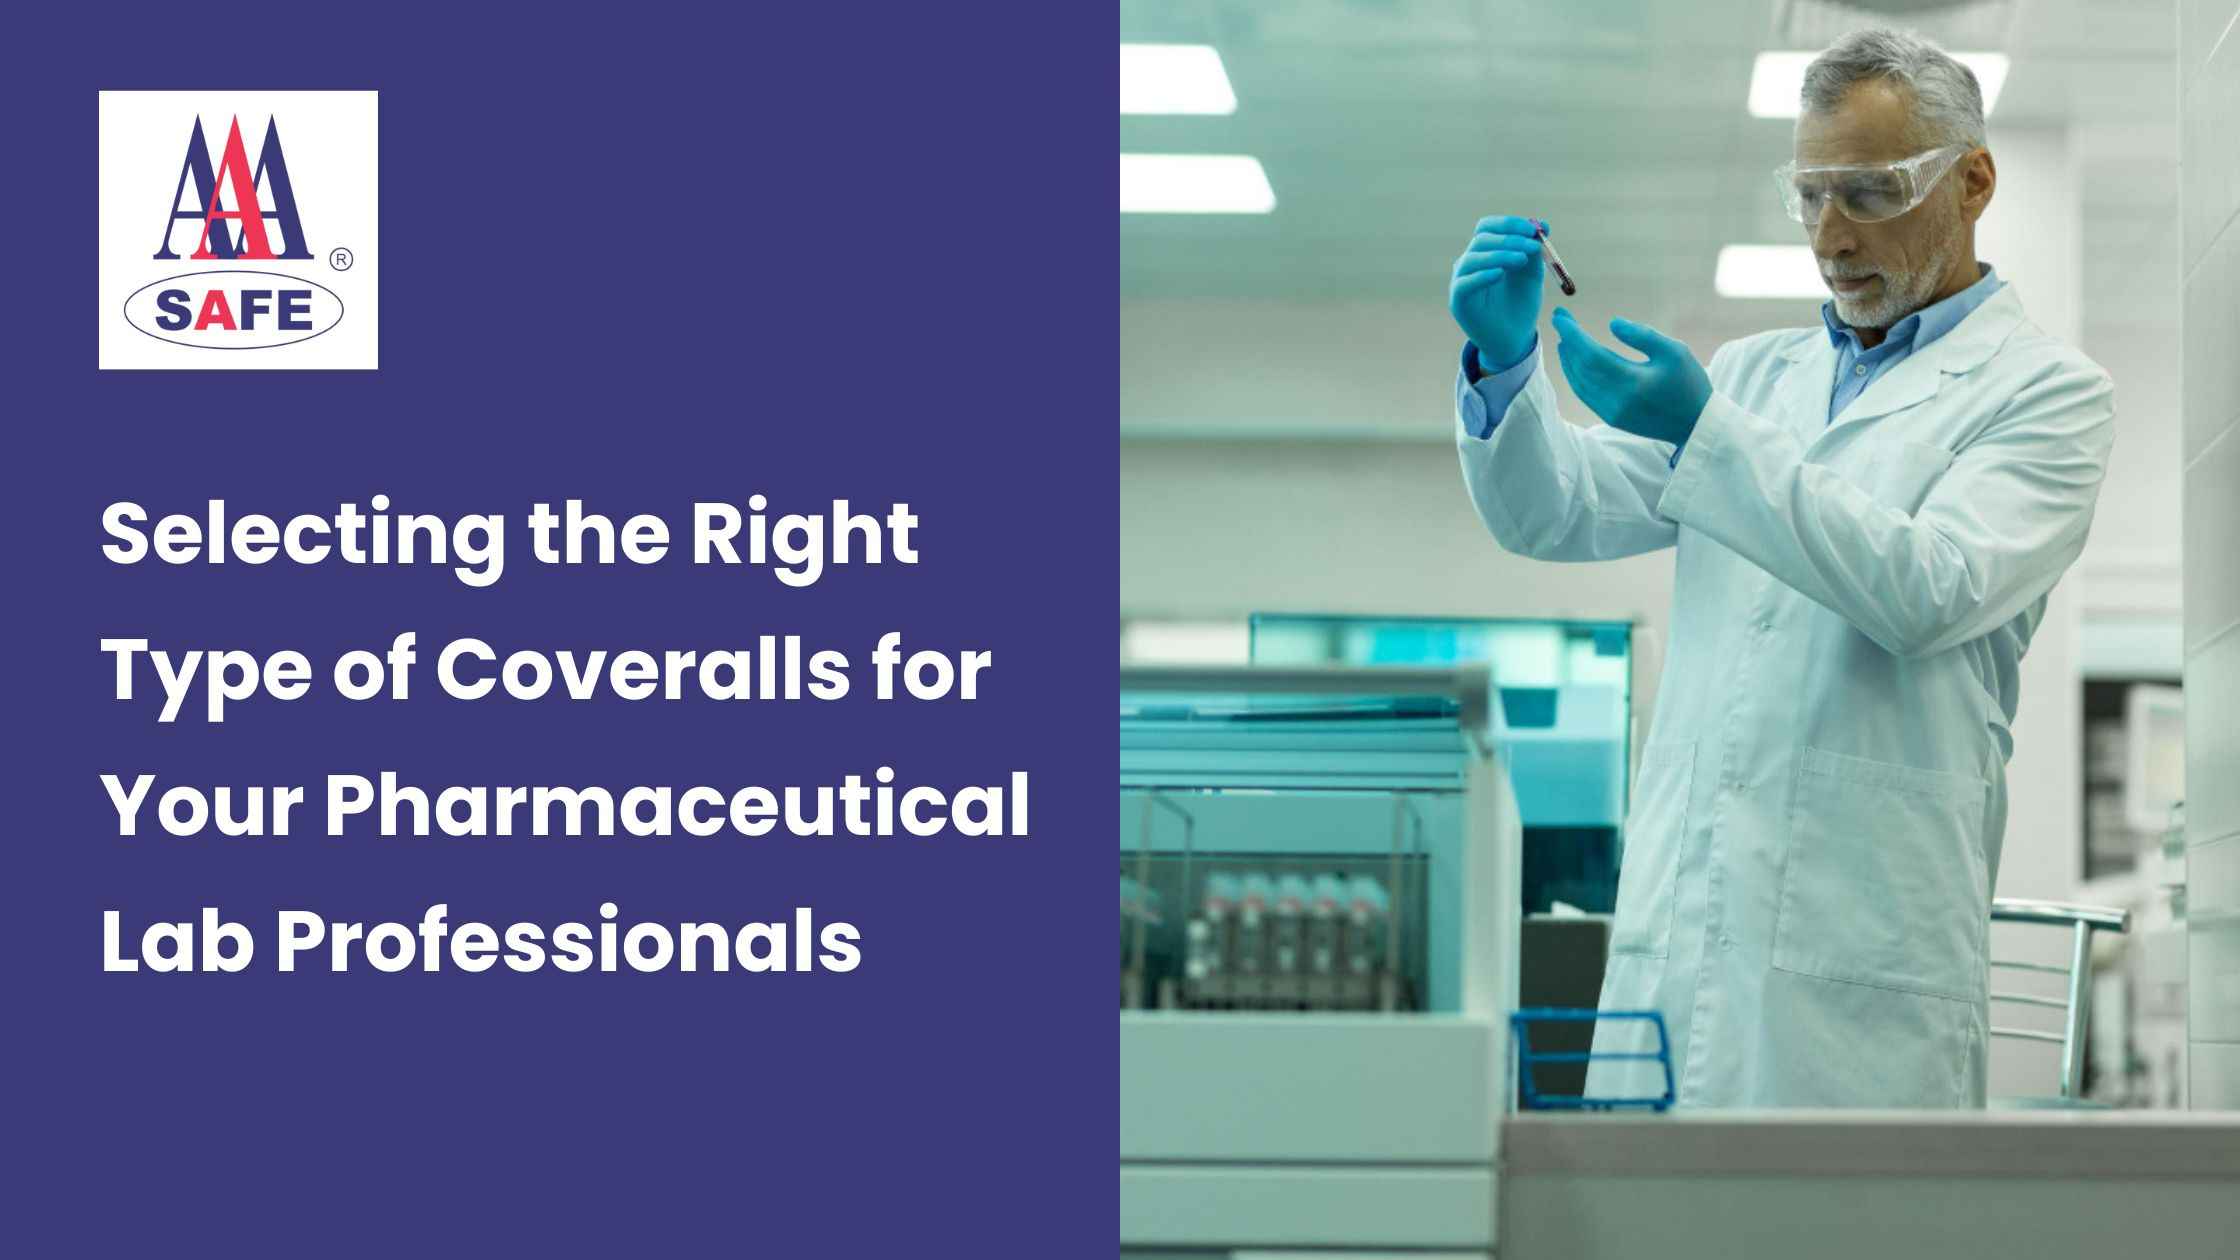 Selecting the Right Type of Coveralls for Your Pharmaceutical Lab Professionals